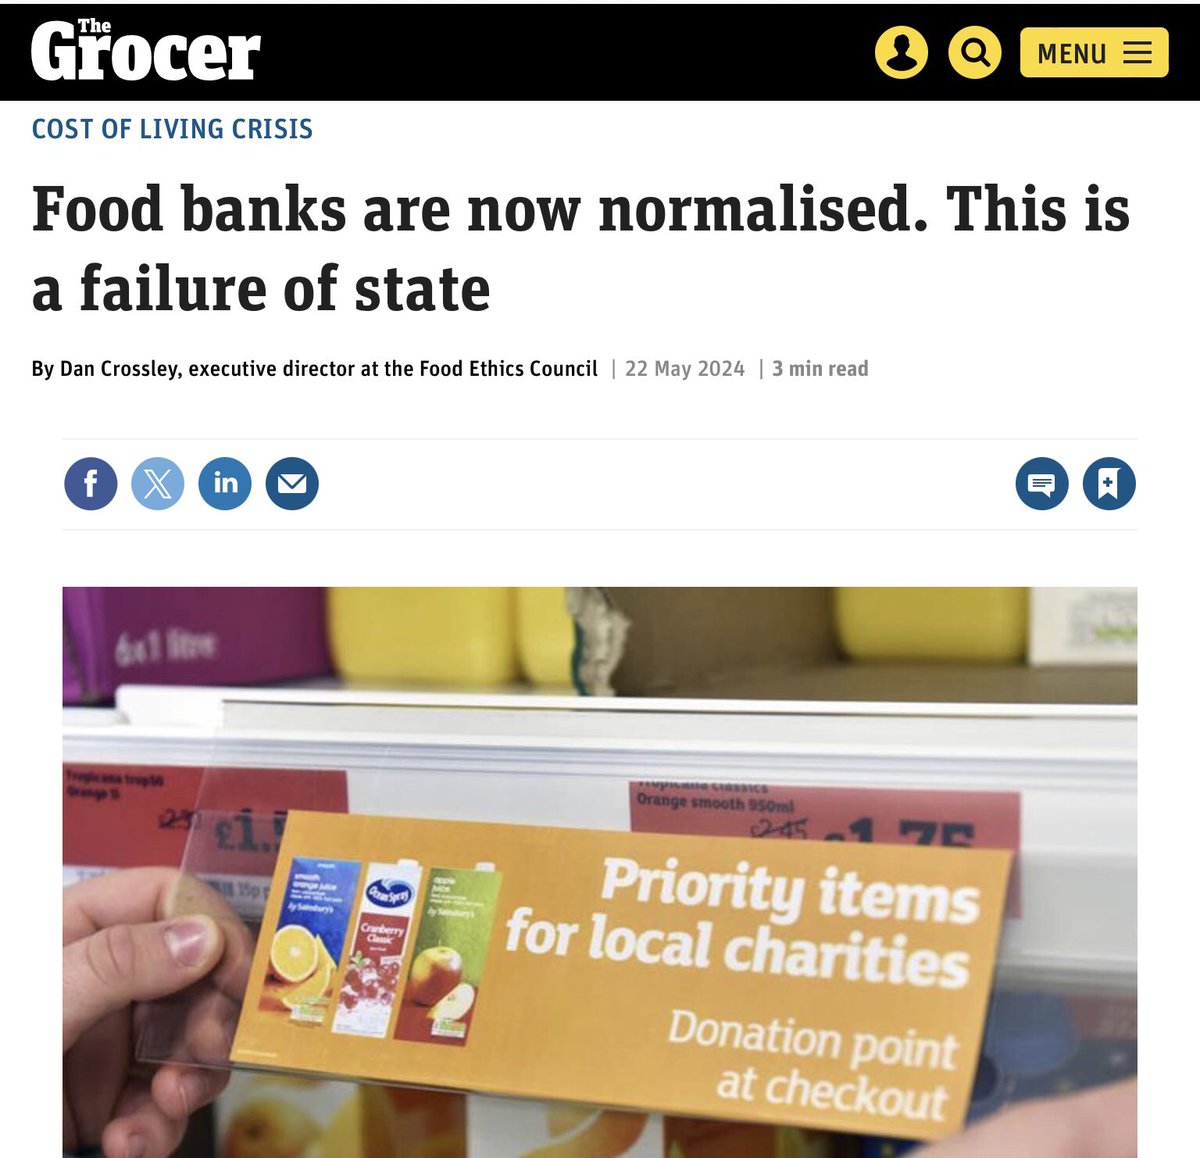 Just one of the Tory achievements in their 14 years of misrule. Foodbanks are now normalized #ToriesCostLives thegrocer.co.uk/cost-of-living…